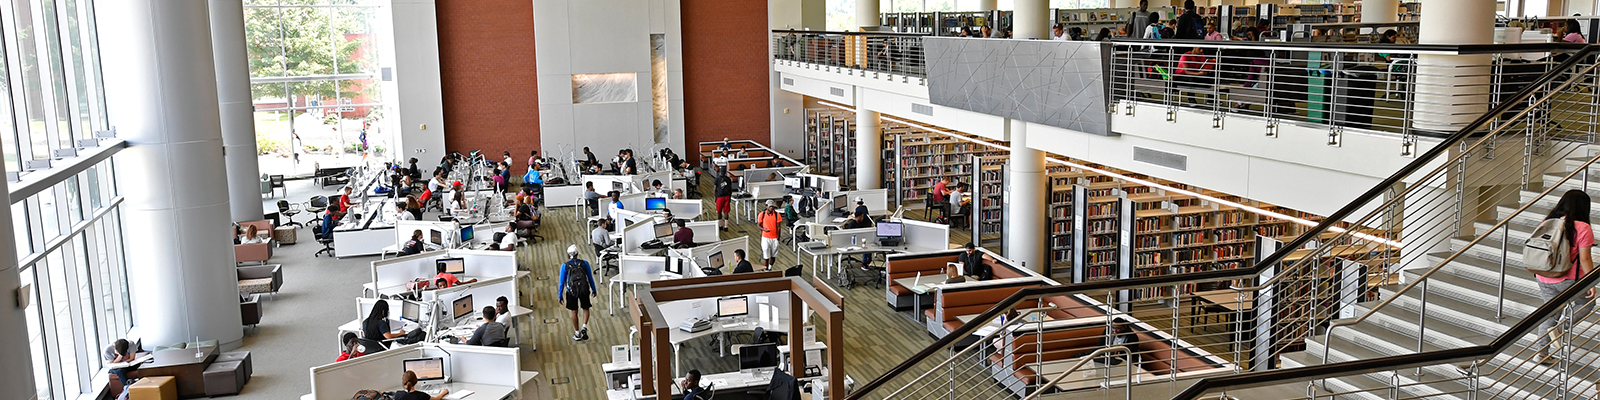 Students Learning at the Kaufman Library